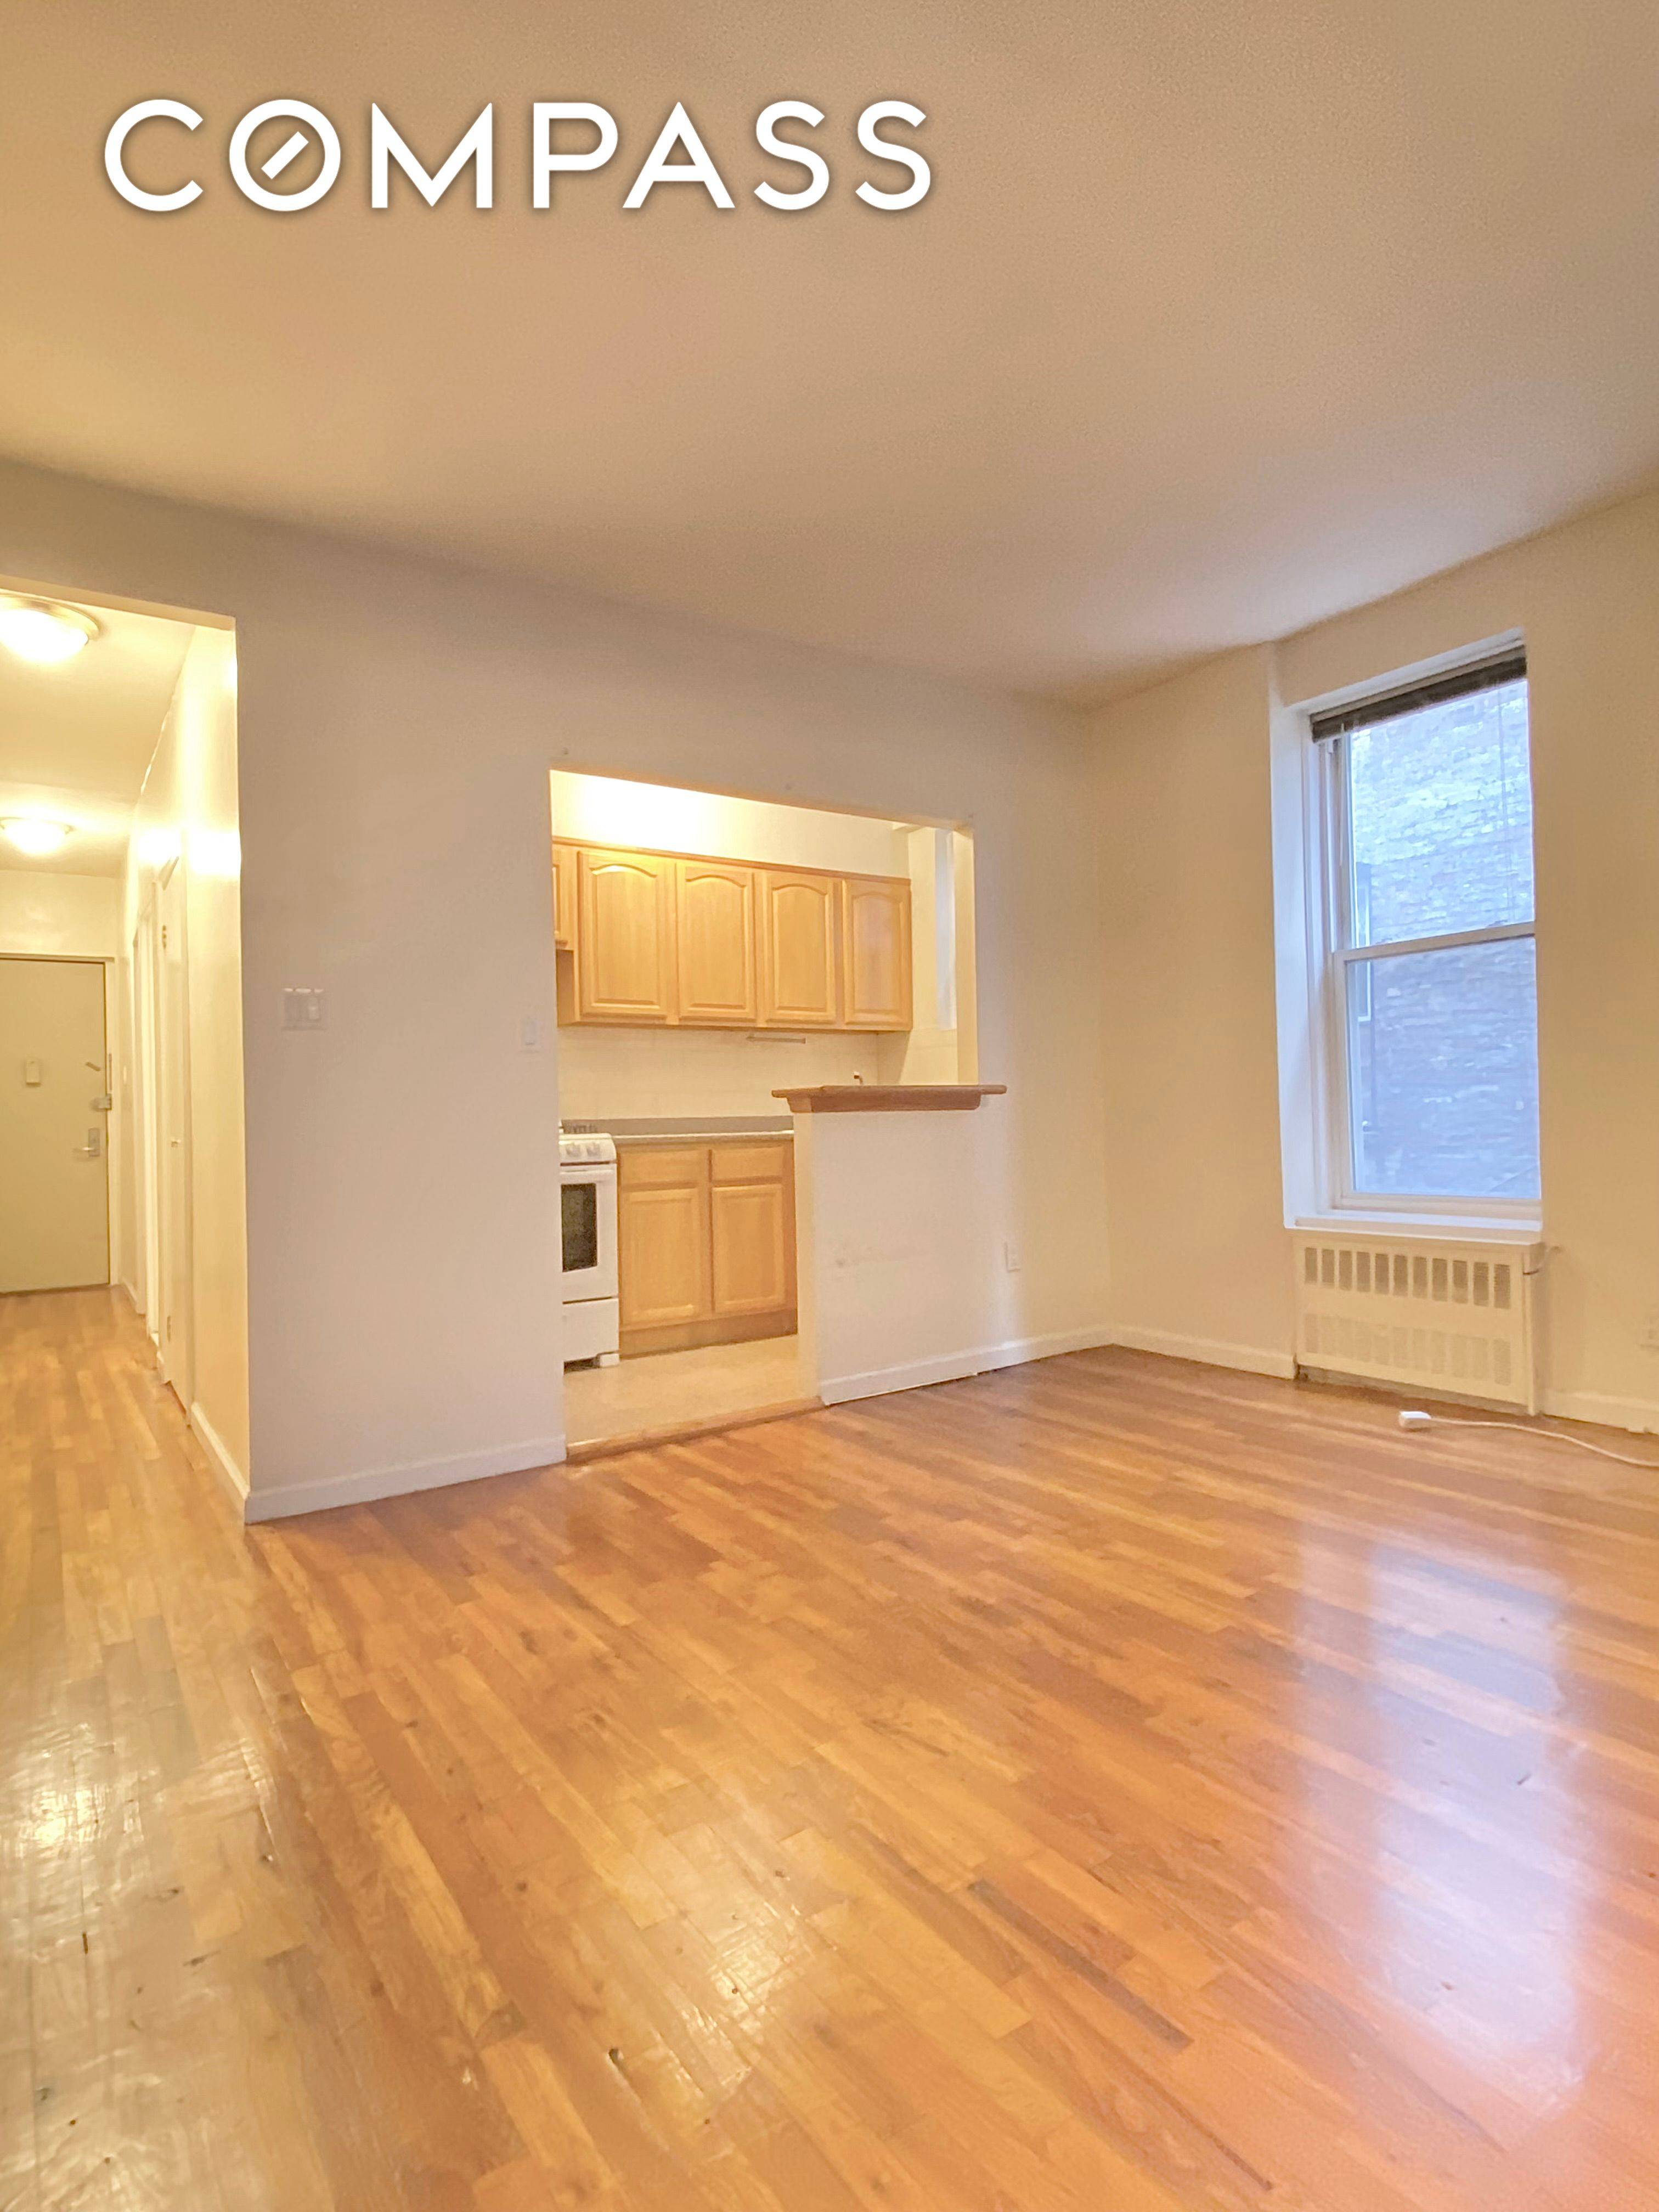 Two bedroom apartment in a highly desirable section of the Upper West Side.